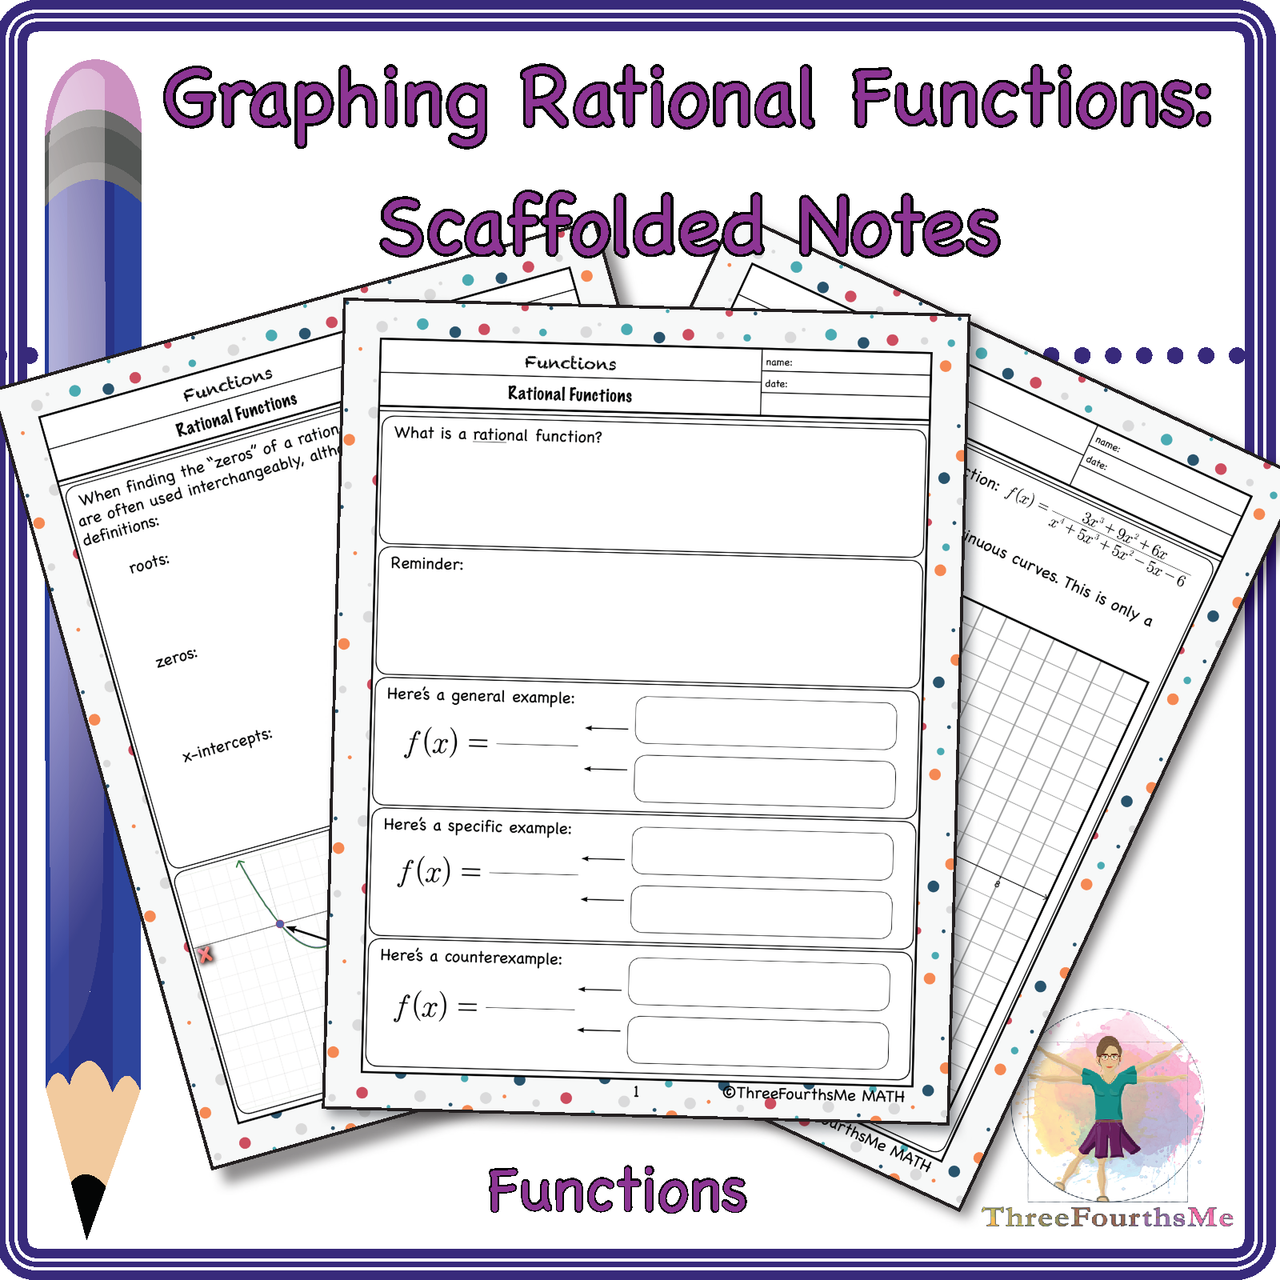 Graphing Rational Functions Scaffolded Notes